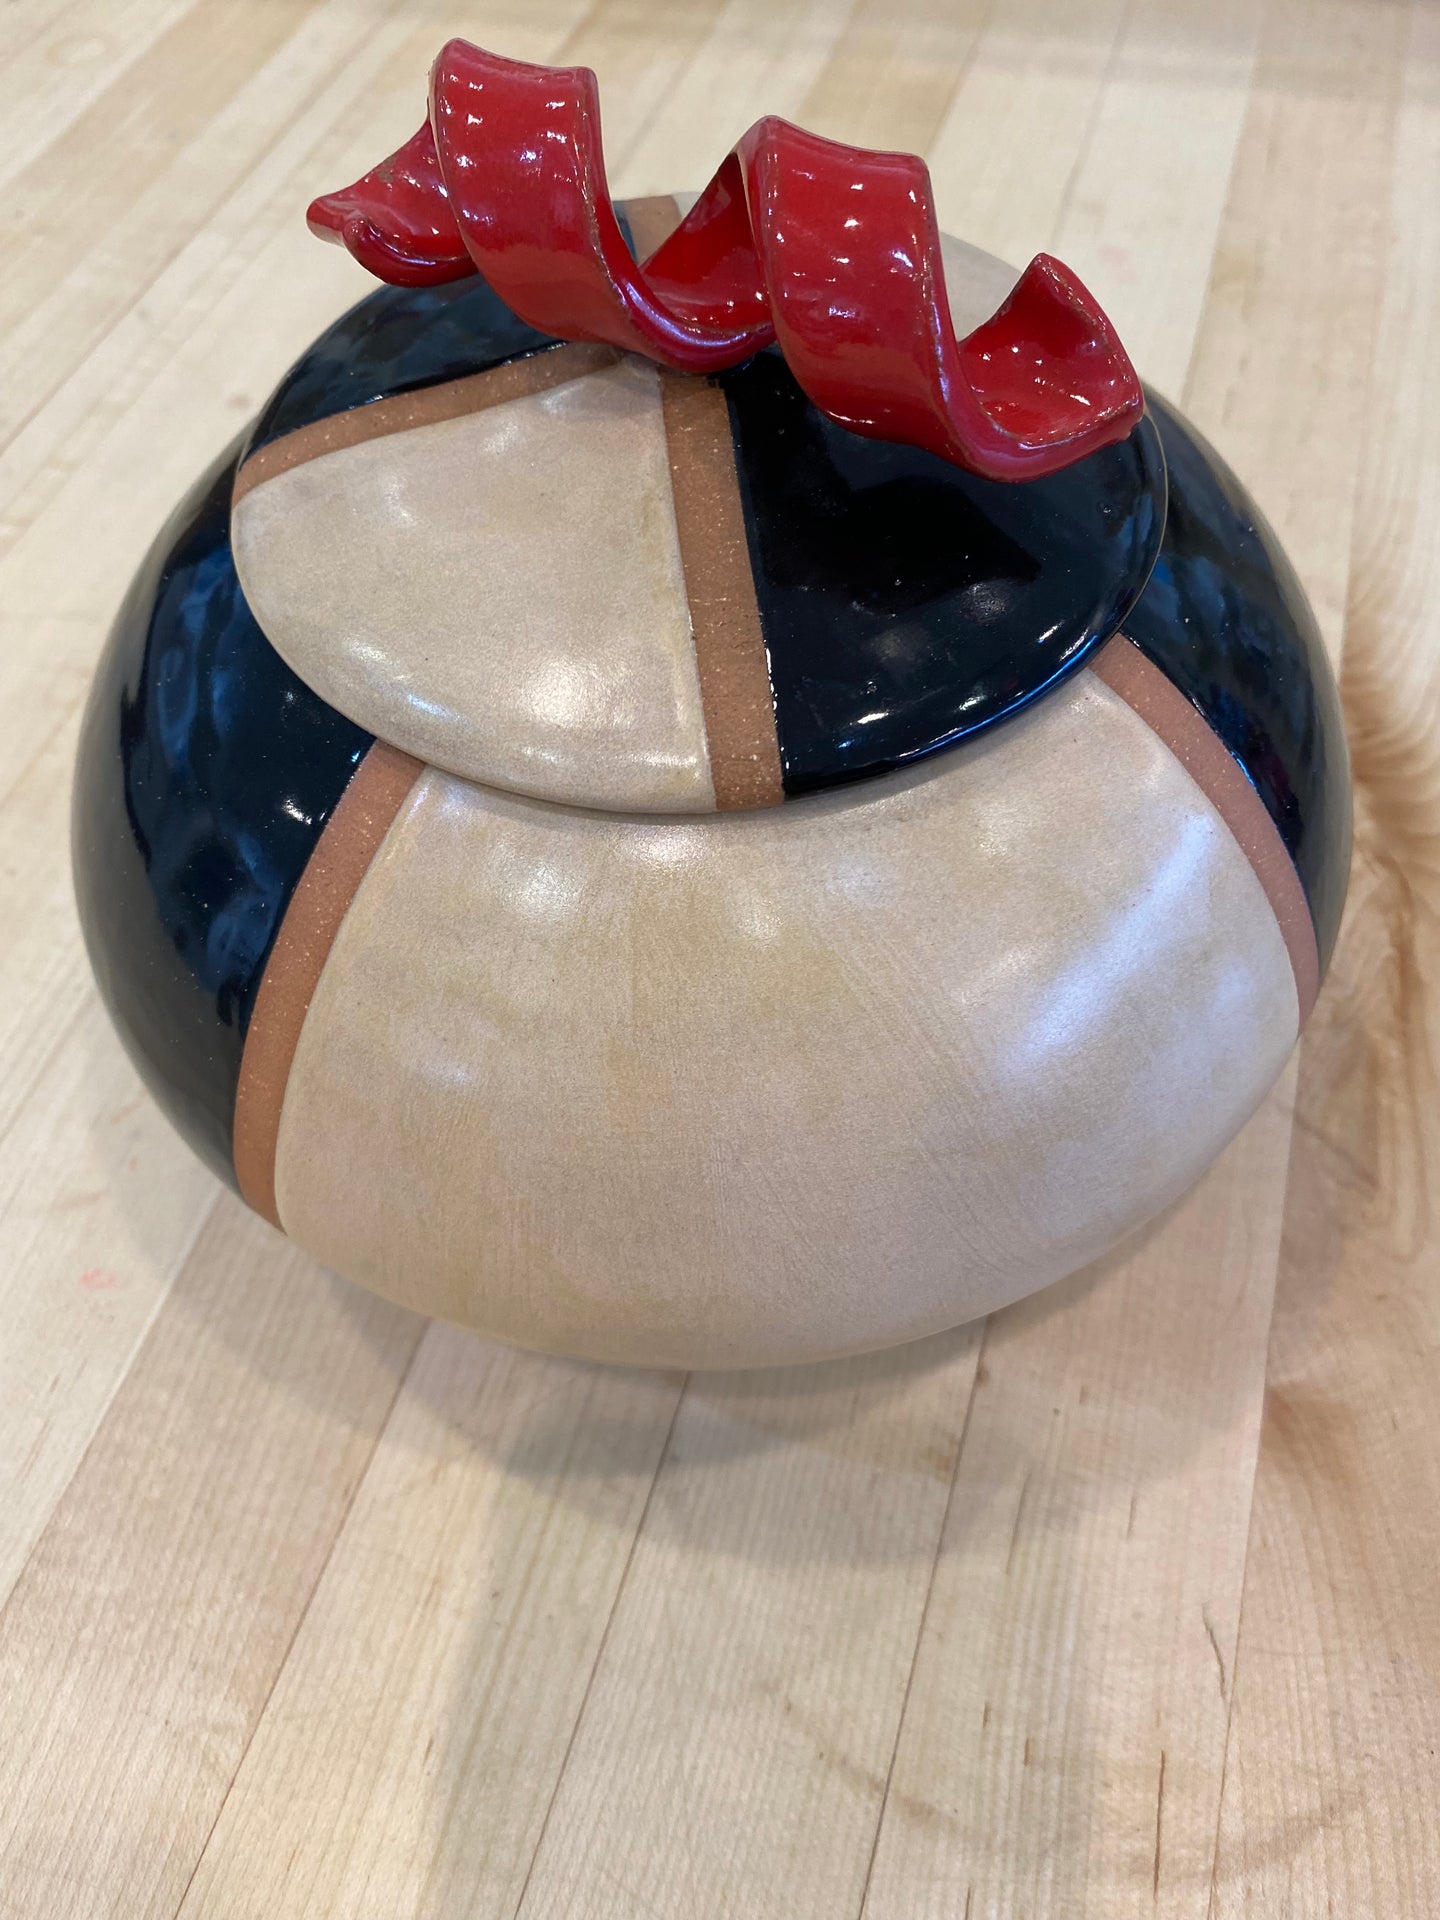 Black and White Jar with Red Handle on the Top